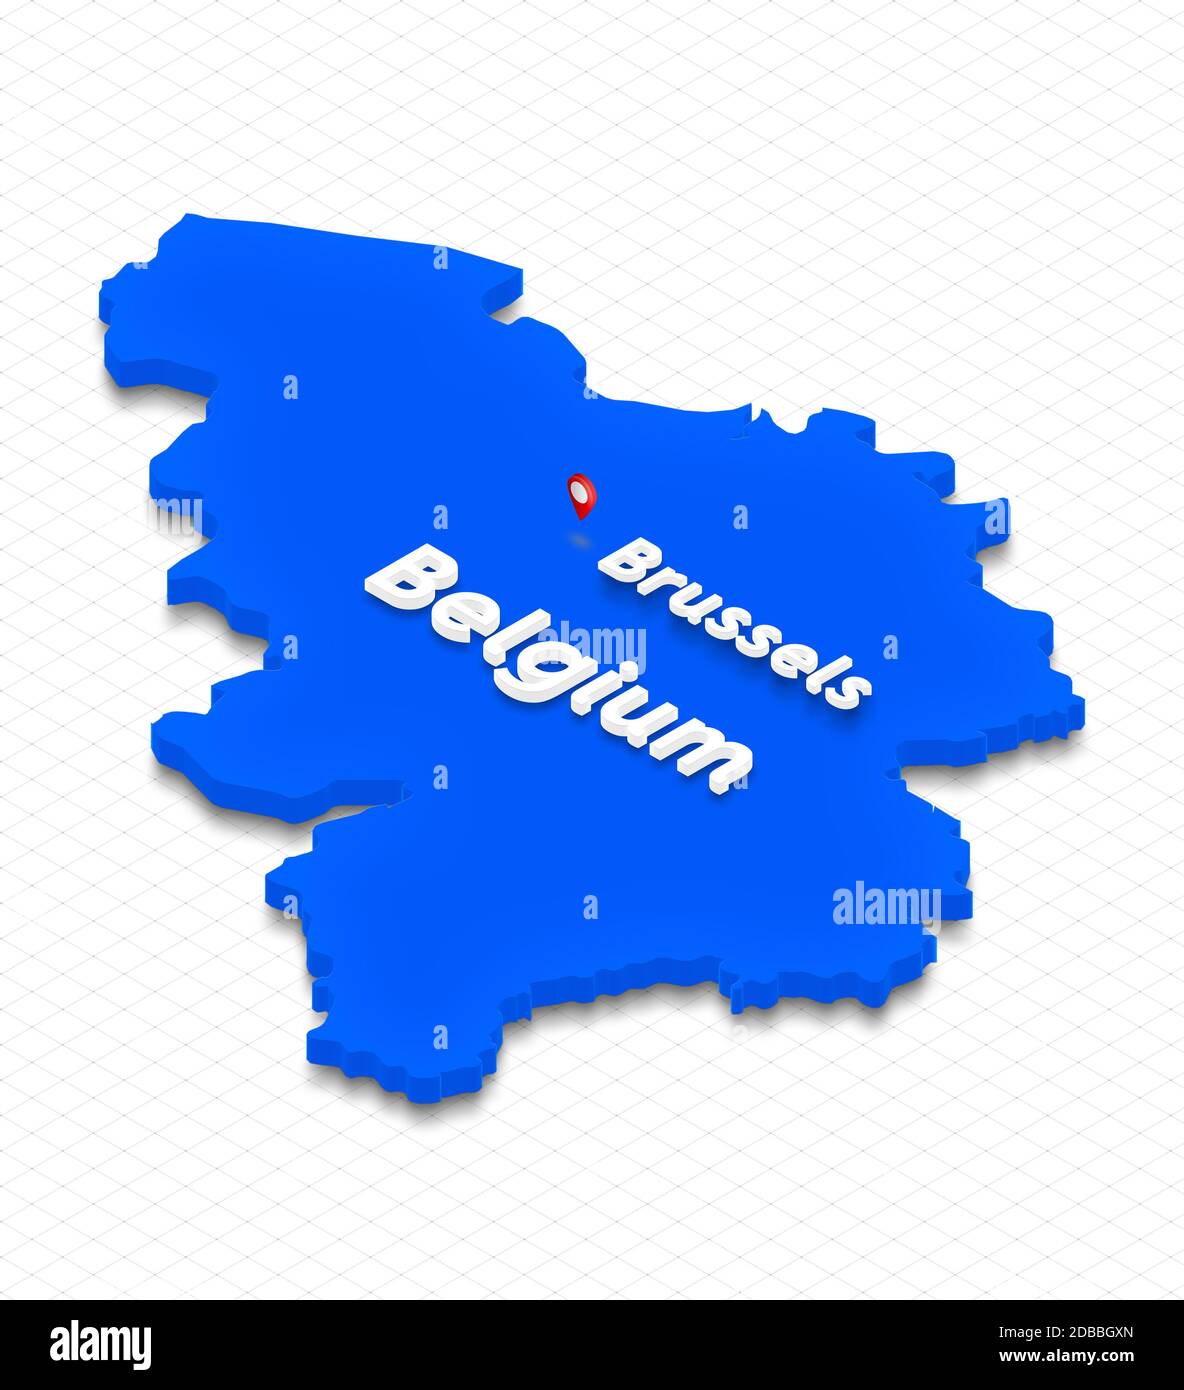 Illustration of a blue ground map of Belgium on grid background. Left 3D isometric perspective projection with the name of country and capital Brussel Stock Photo